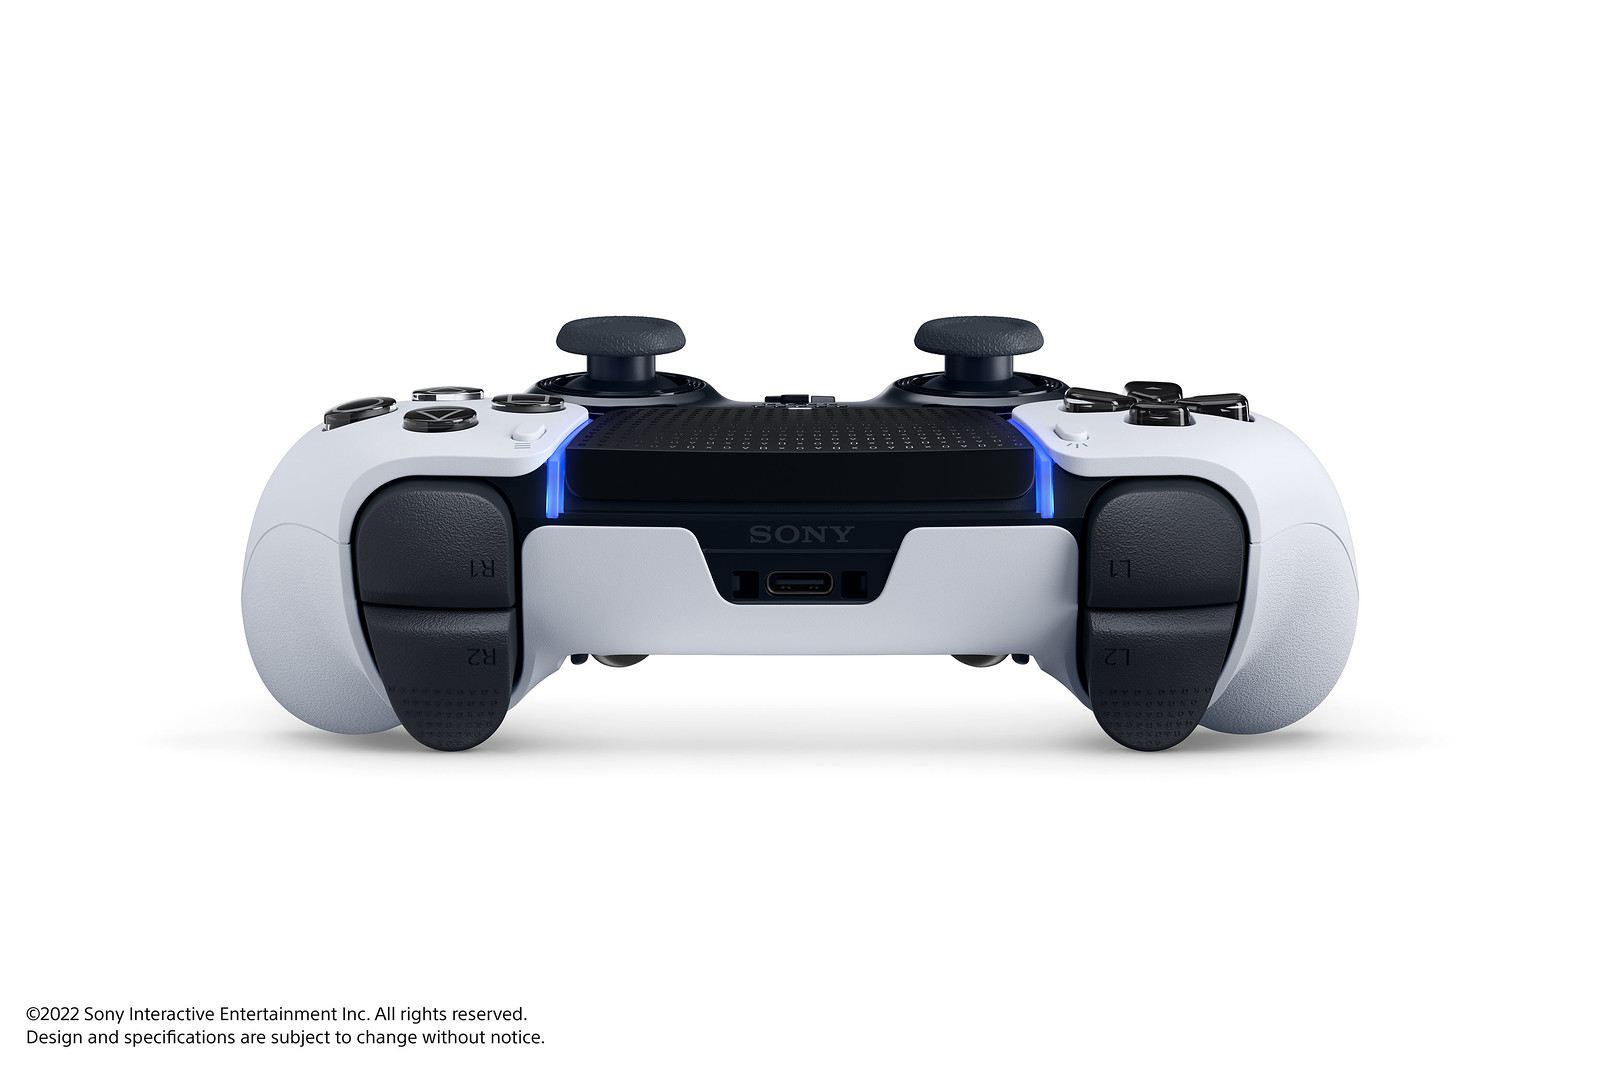 Is Sony about to revamp the PS5's DualSense controller? - The Verge